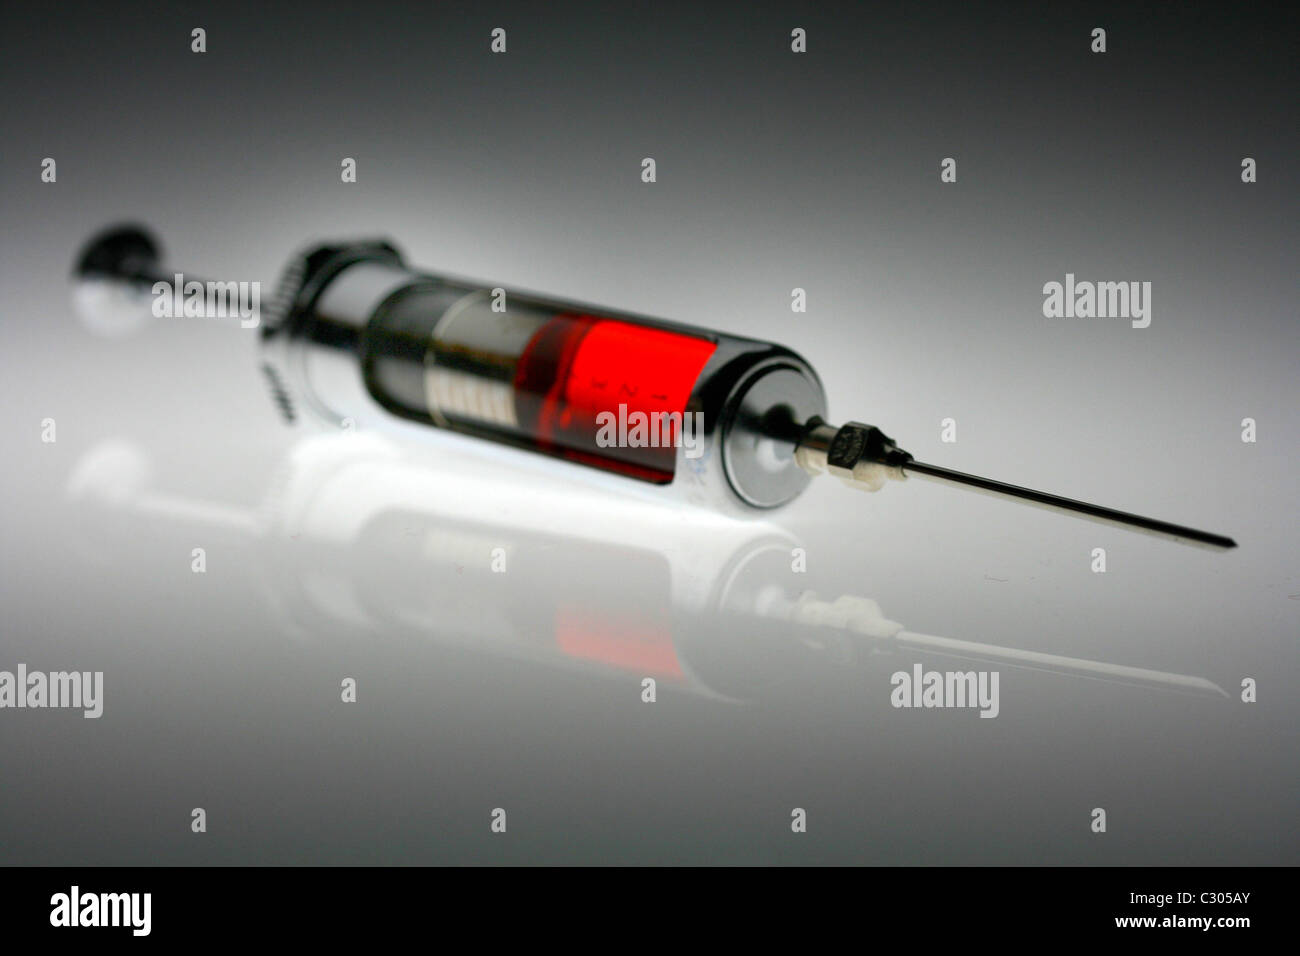 Syringe with red fluid Stock Photo